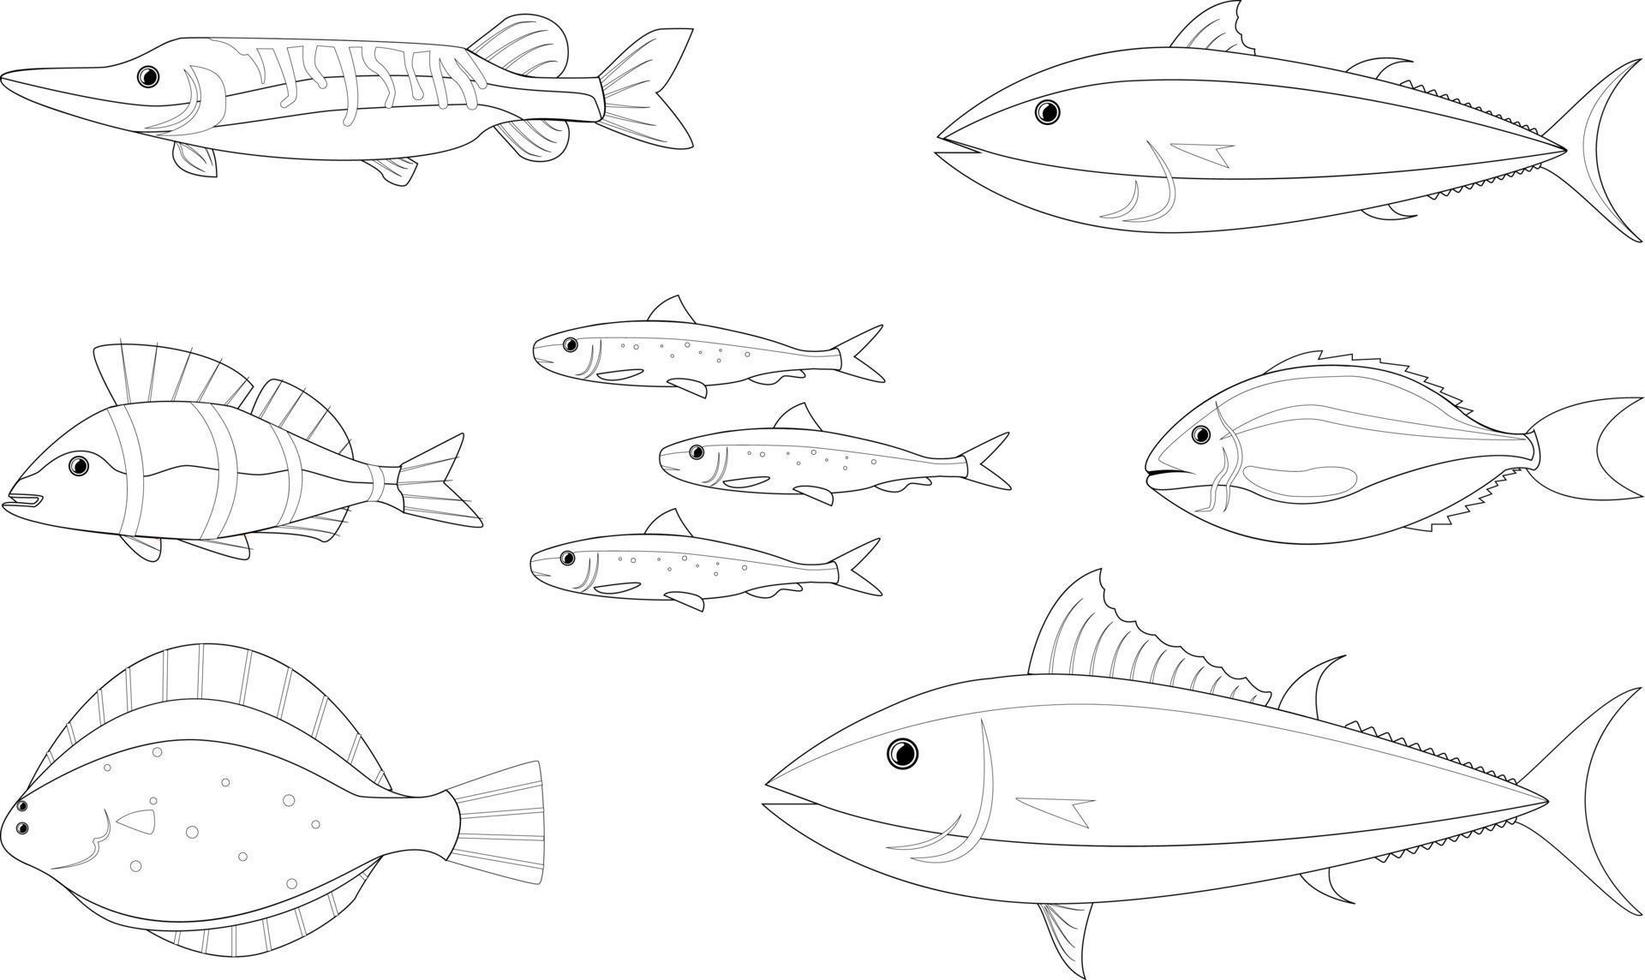 various fishes picture with no color for drawing book vector